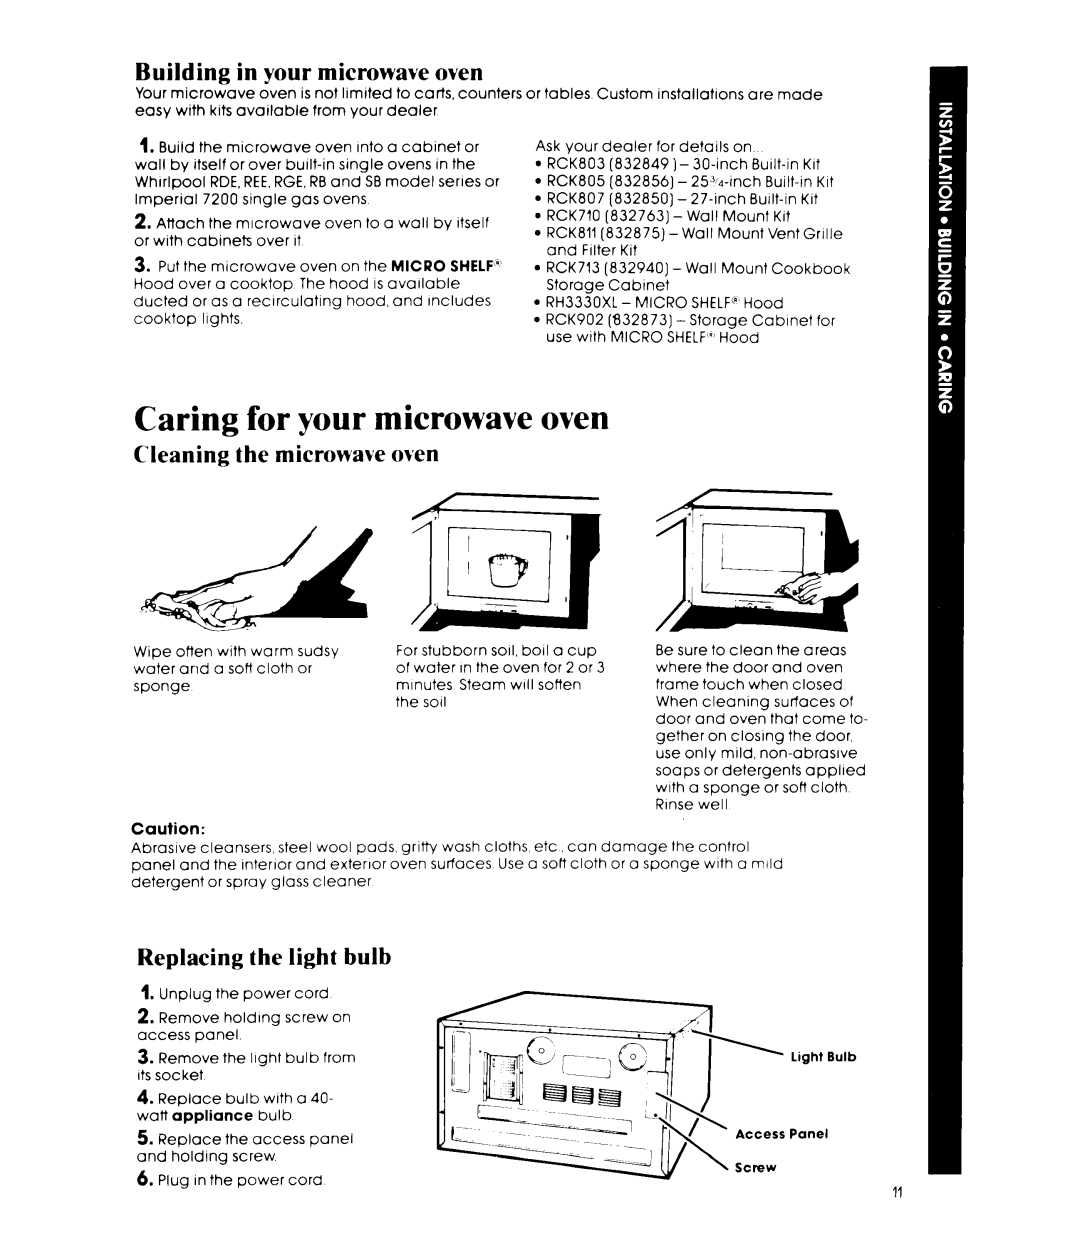 Whirlpool MW81OOXP manual Caring for your microwave oven, Building in your microwave oven, Cleaning the microwave oven 